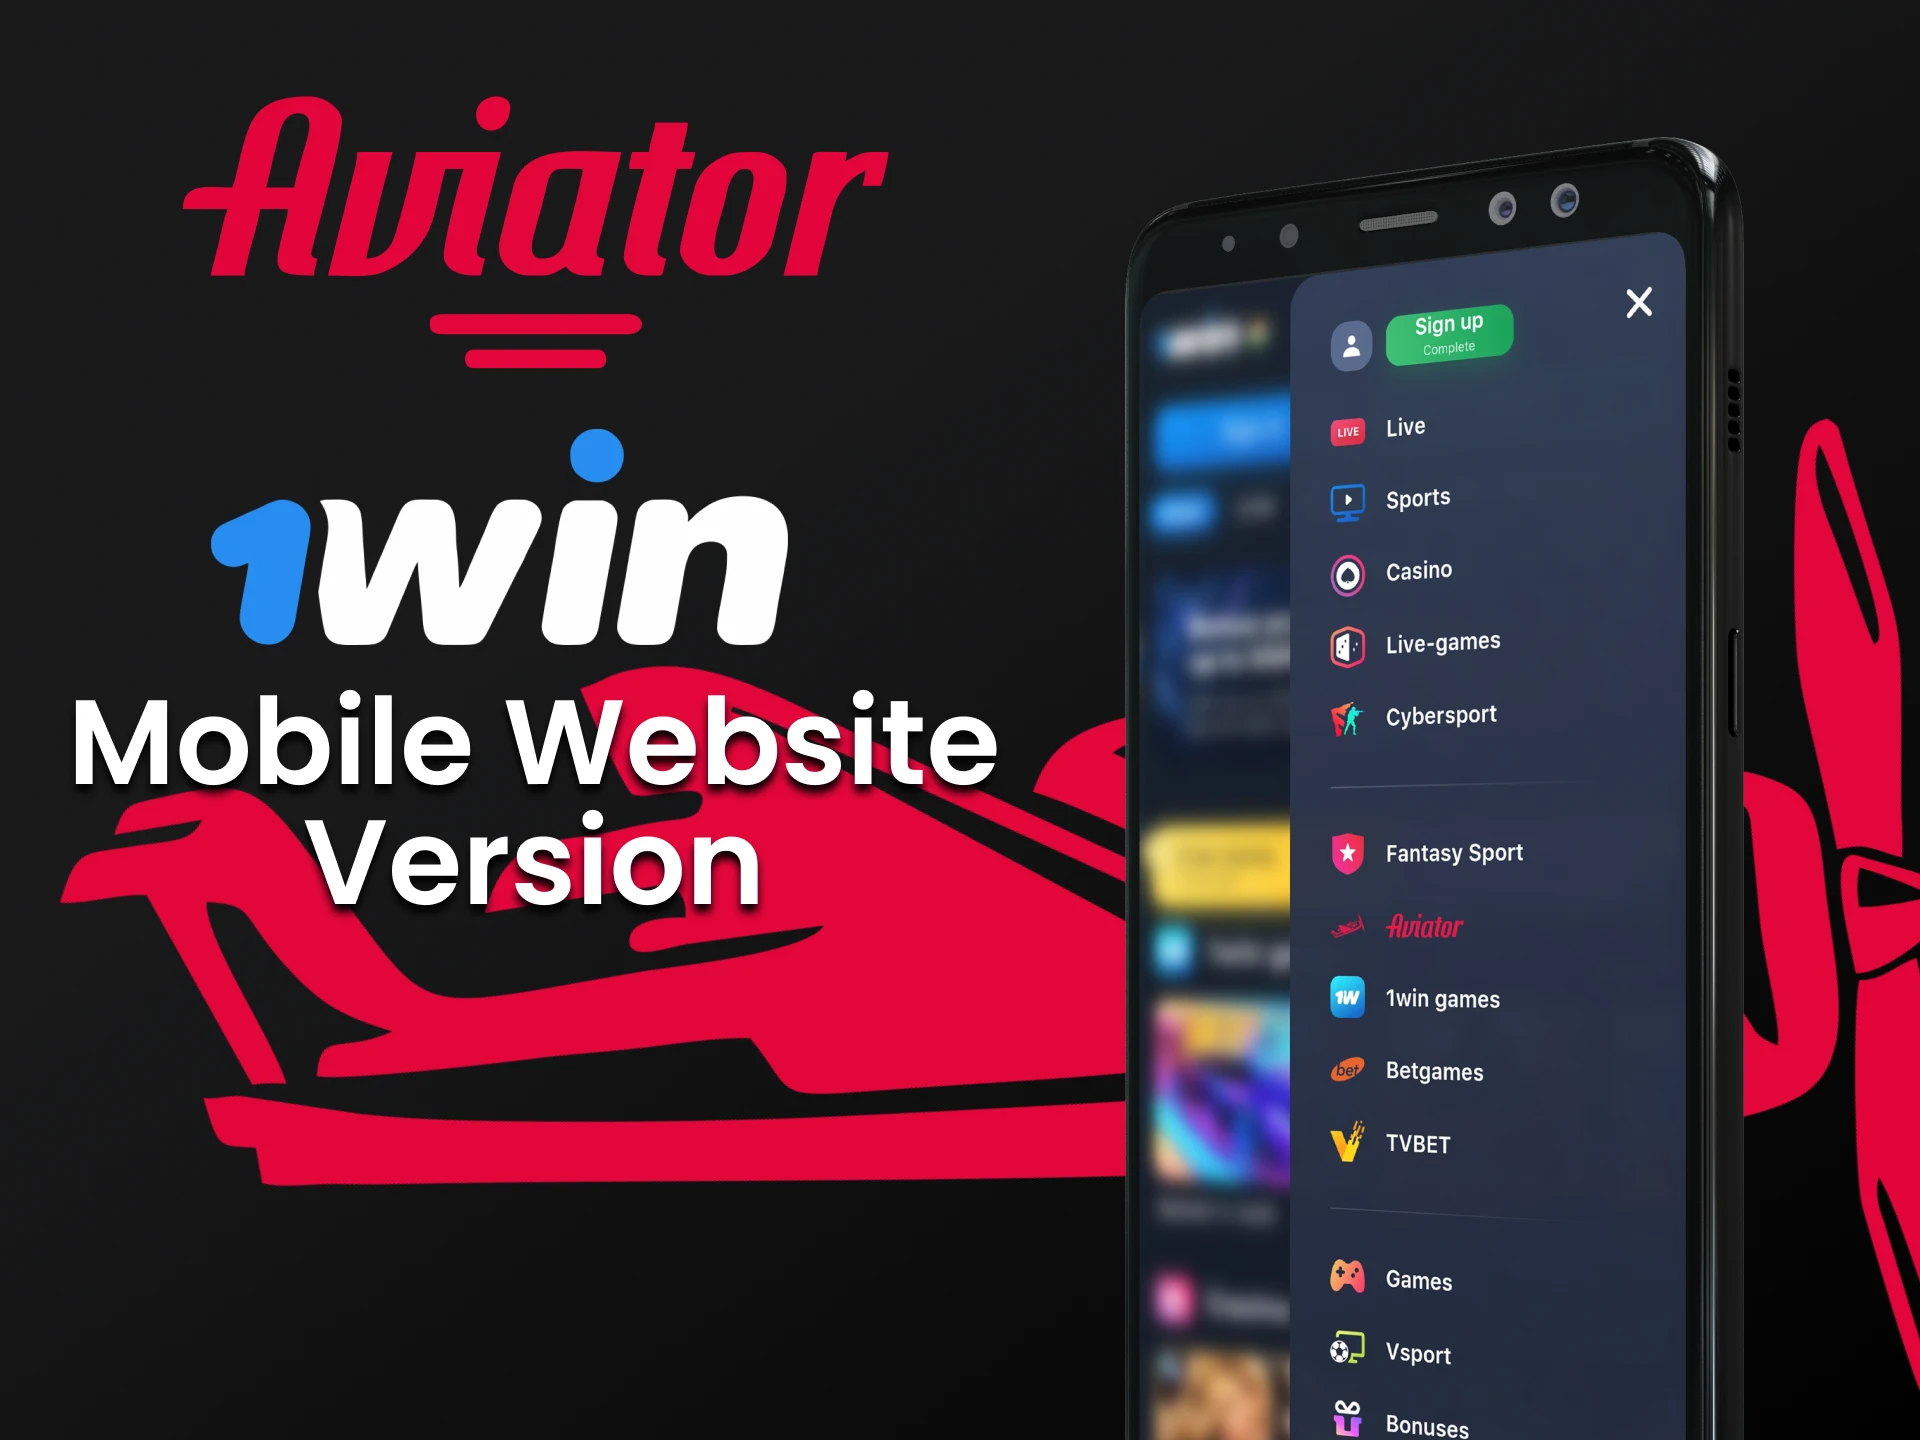 Play Aviator through your smartphone at 1win.